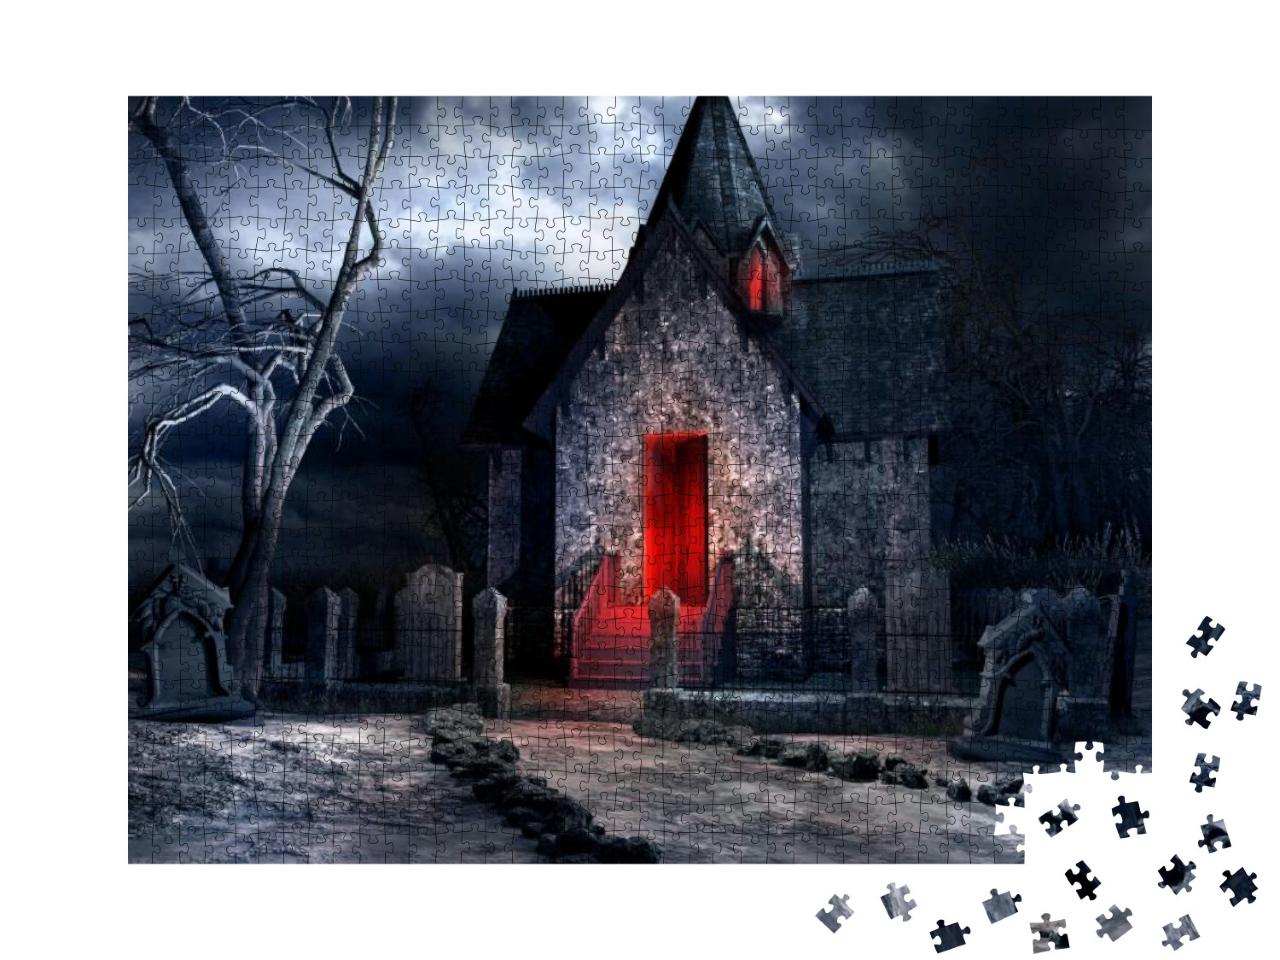 Dark Gothic Scenery with Old Crypt, Creepy Tree & Bones... Jigsaw Puzzle with 1000 pieces